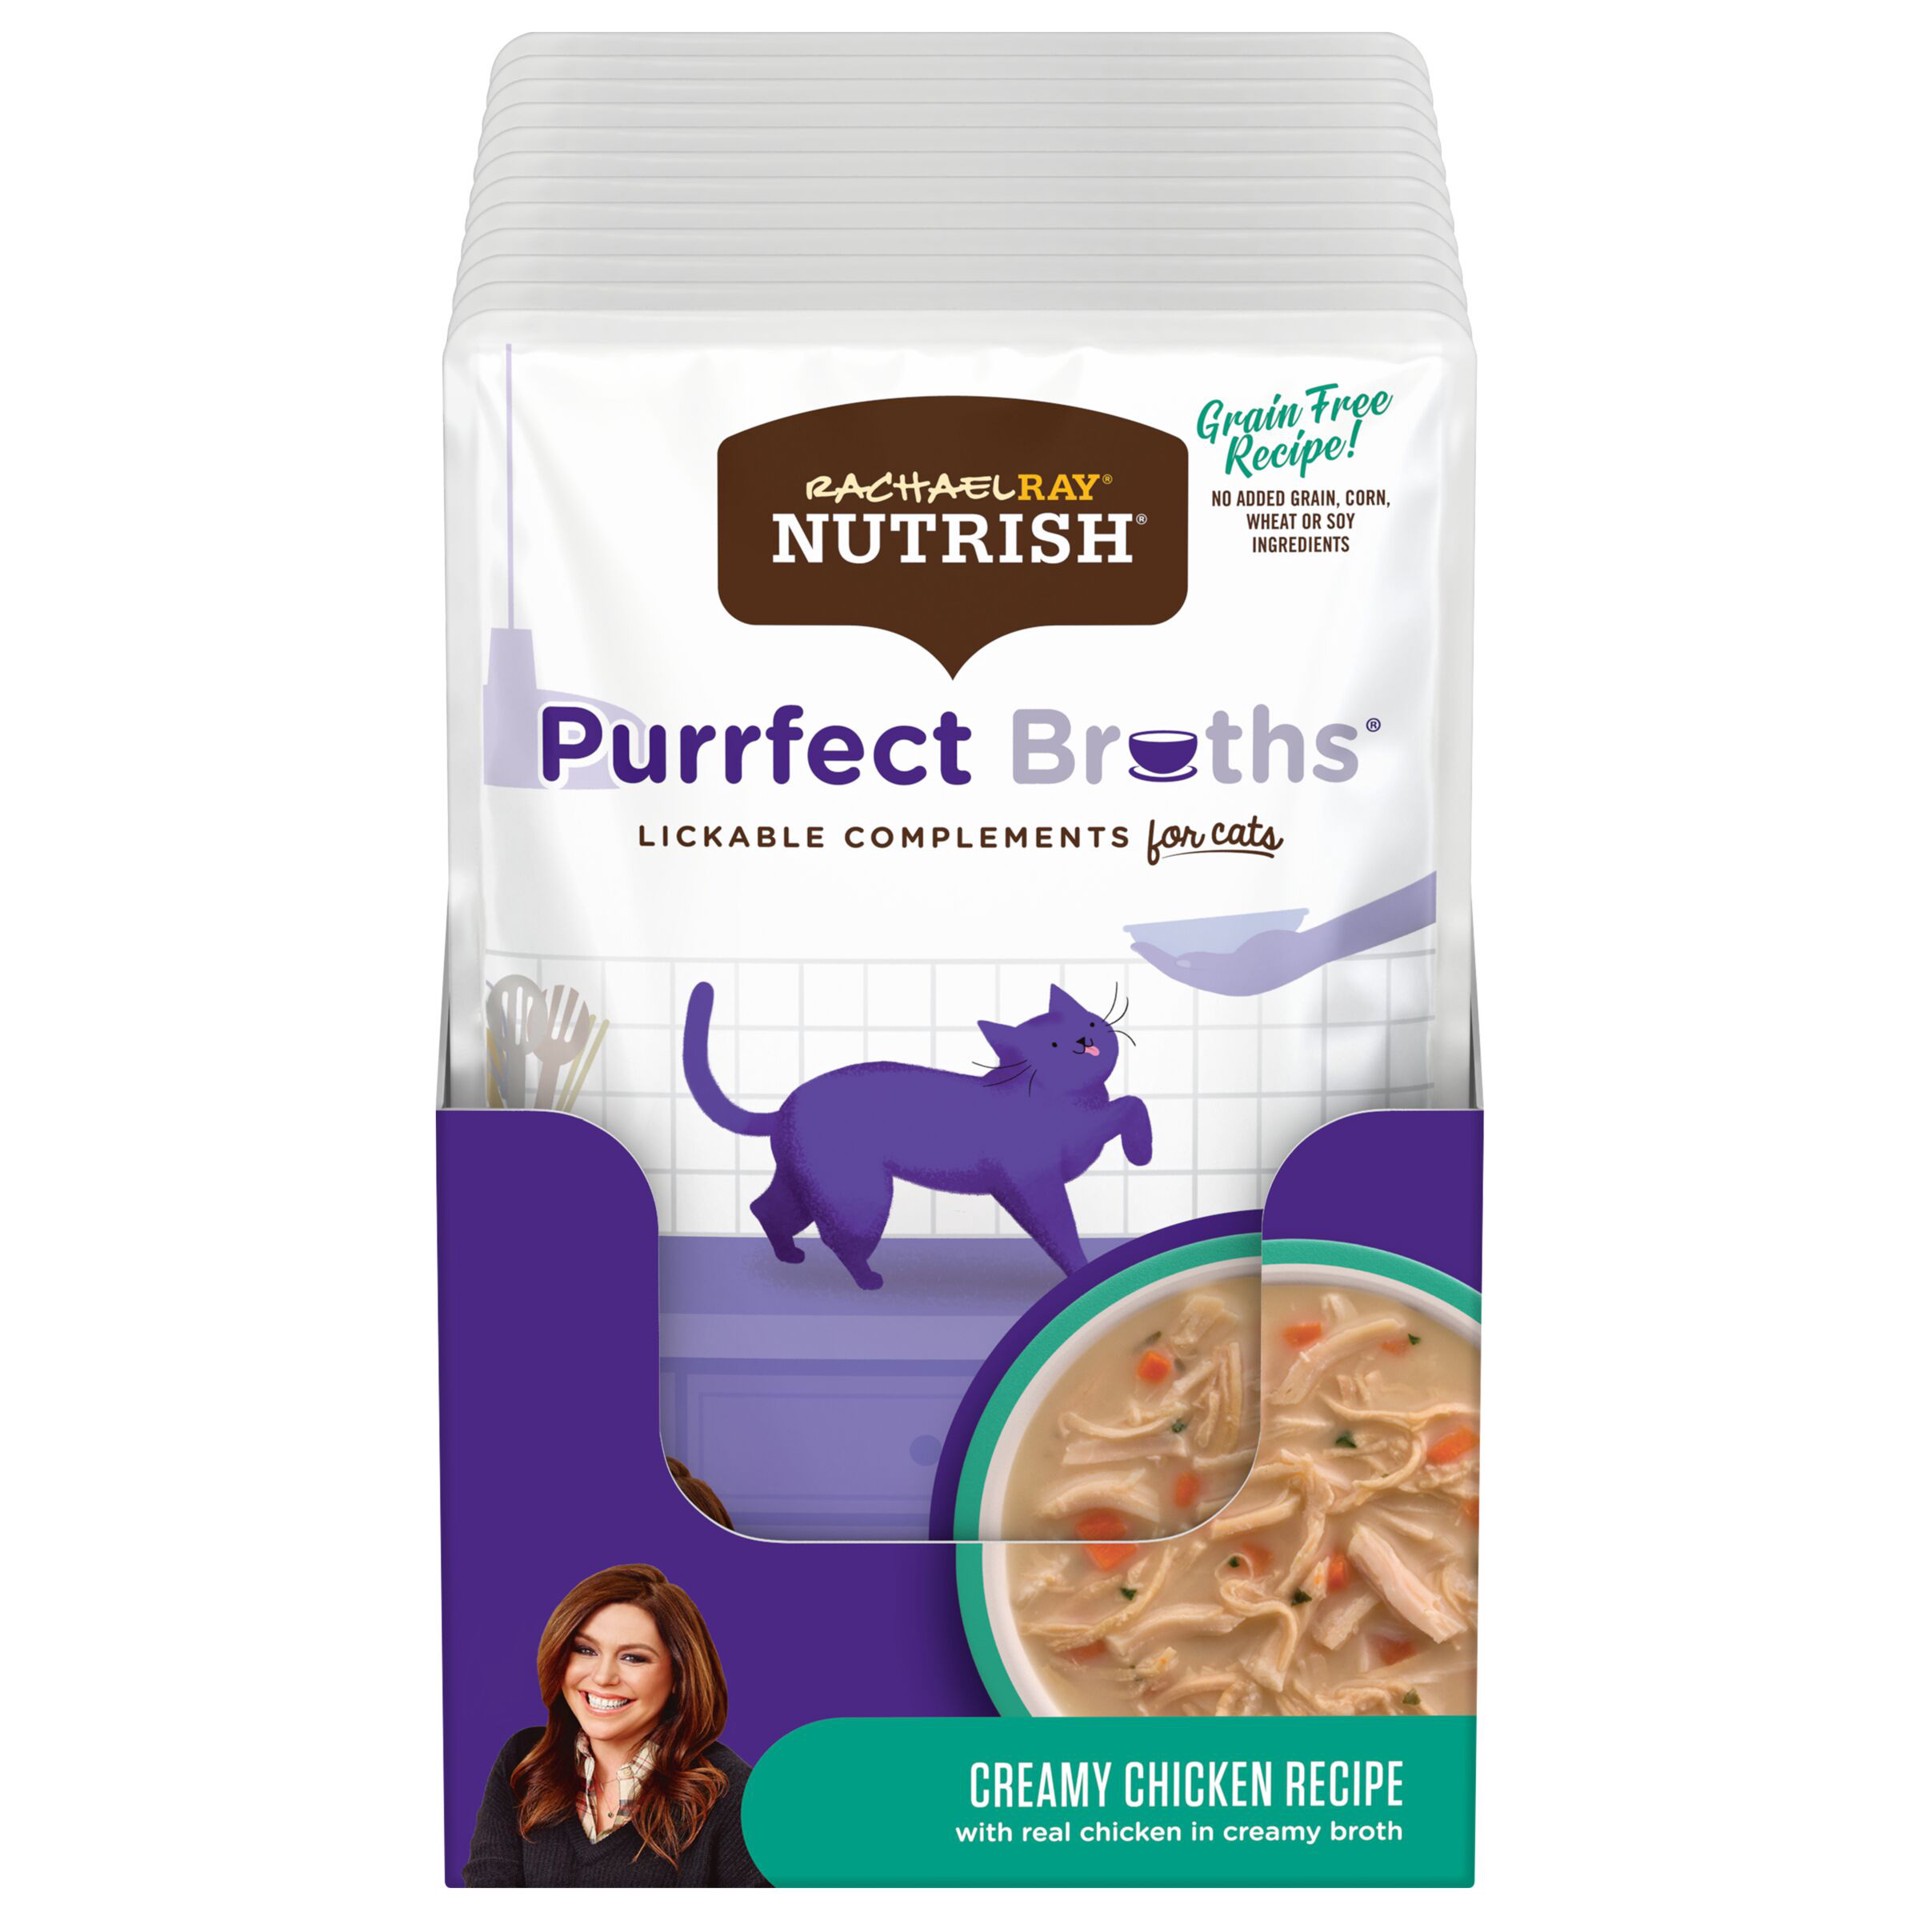 slide 1 of 8, Rachael Ray Nutrish Purrfect Broths Creamy Chicken Recipe, Lickable Complements for Cats, 1.4 oz. Pouch, 1.4 oz